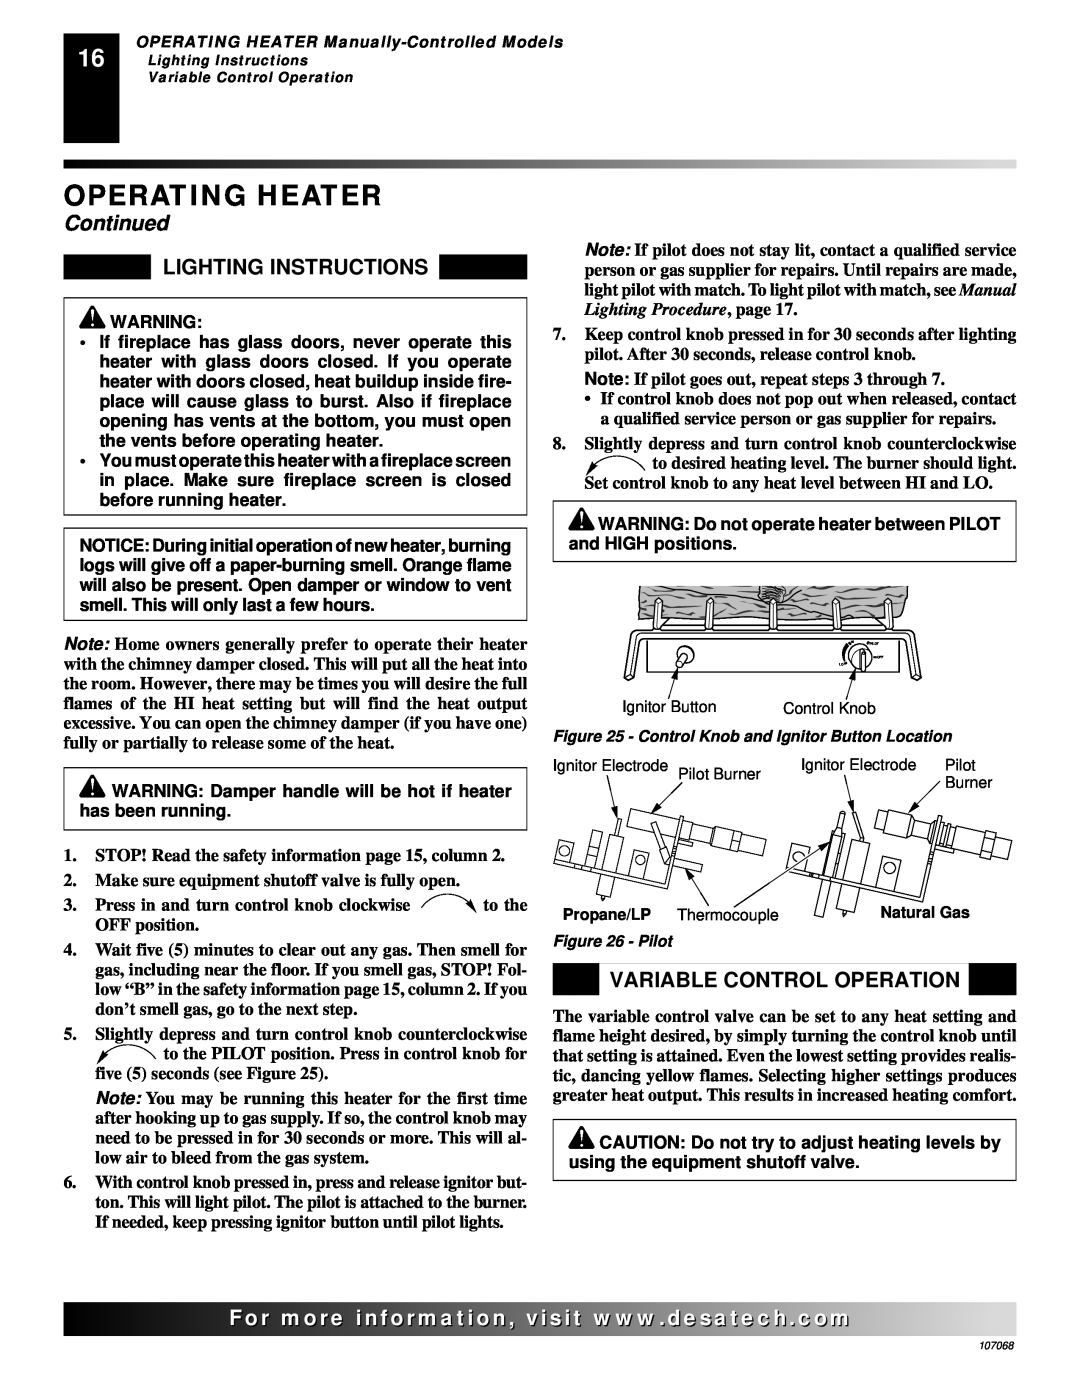 Desa CGS3124N, CLD3018NA, CLD3018PA Lighting Instructions, Variable Control Operation, Operating Heater, Continued 